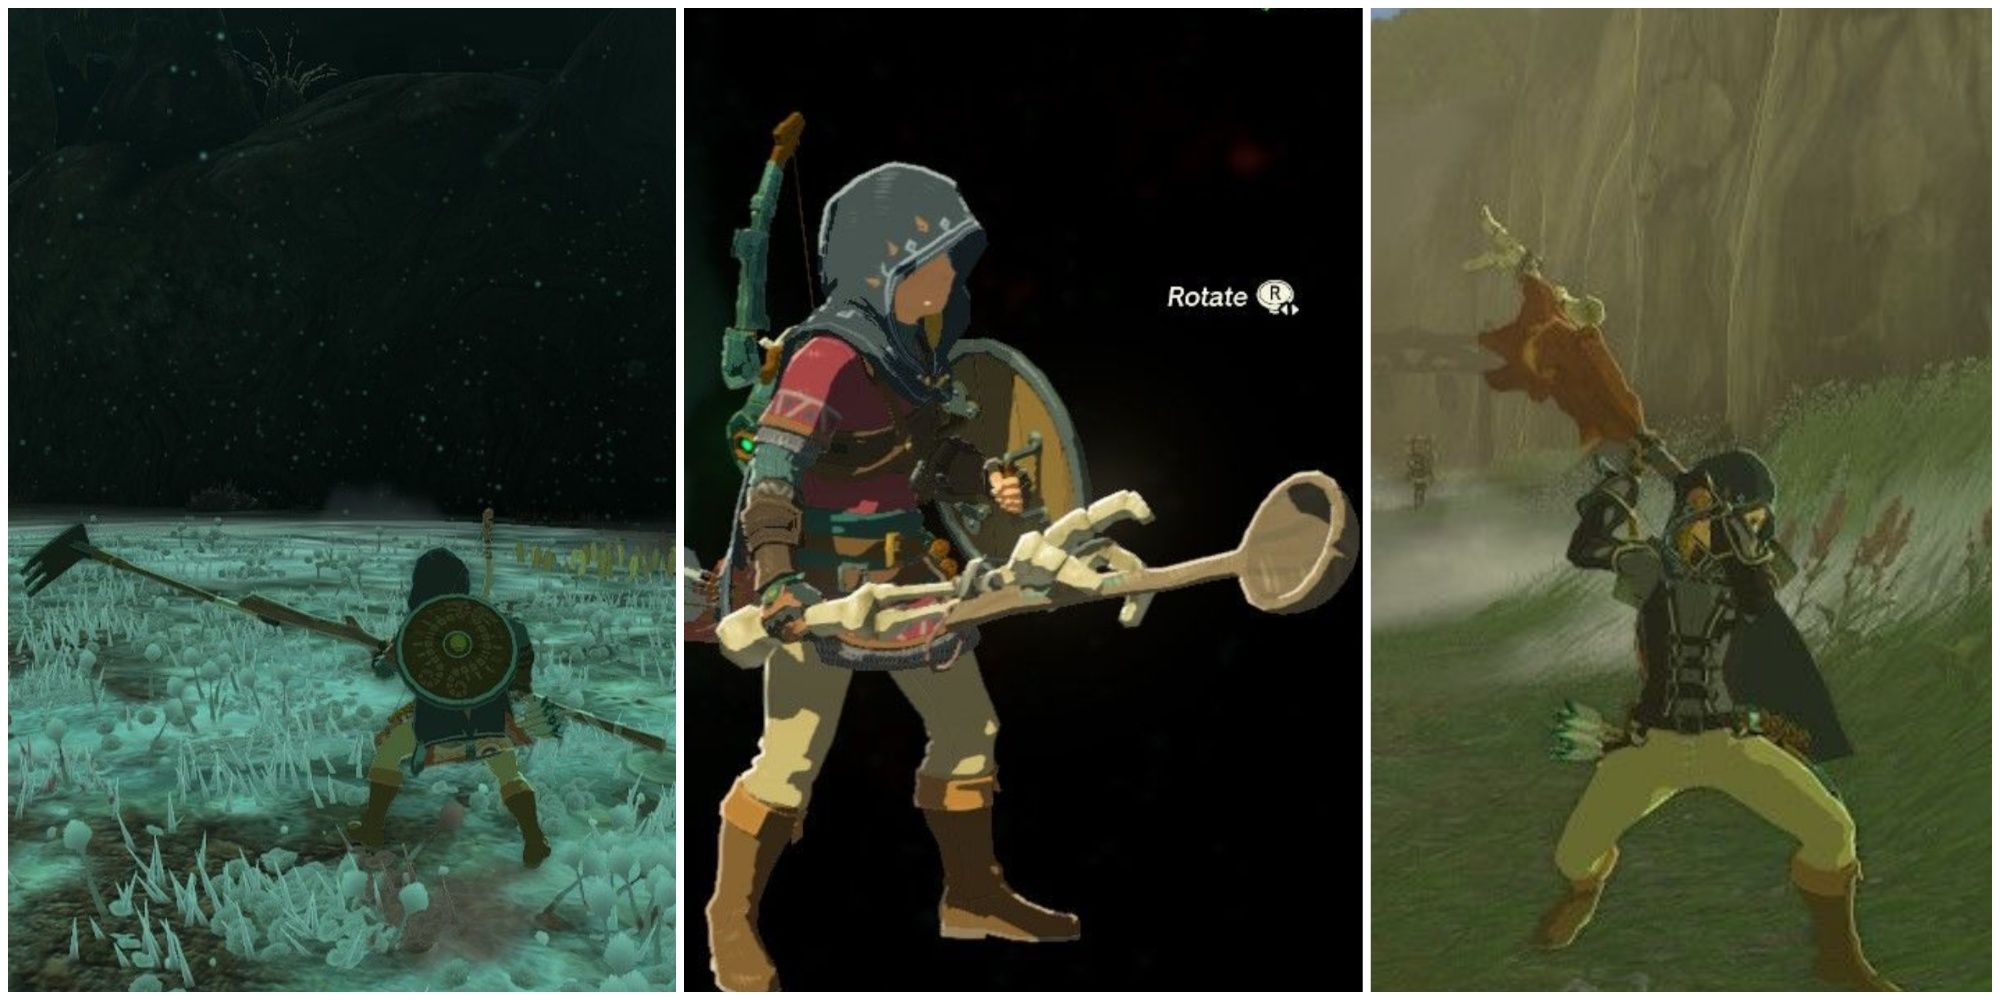 link with fused spear, soup laddle, bokoblin arm, durable weapon